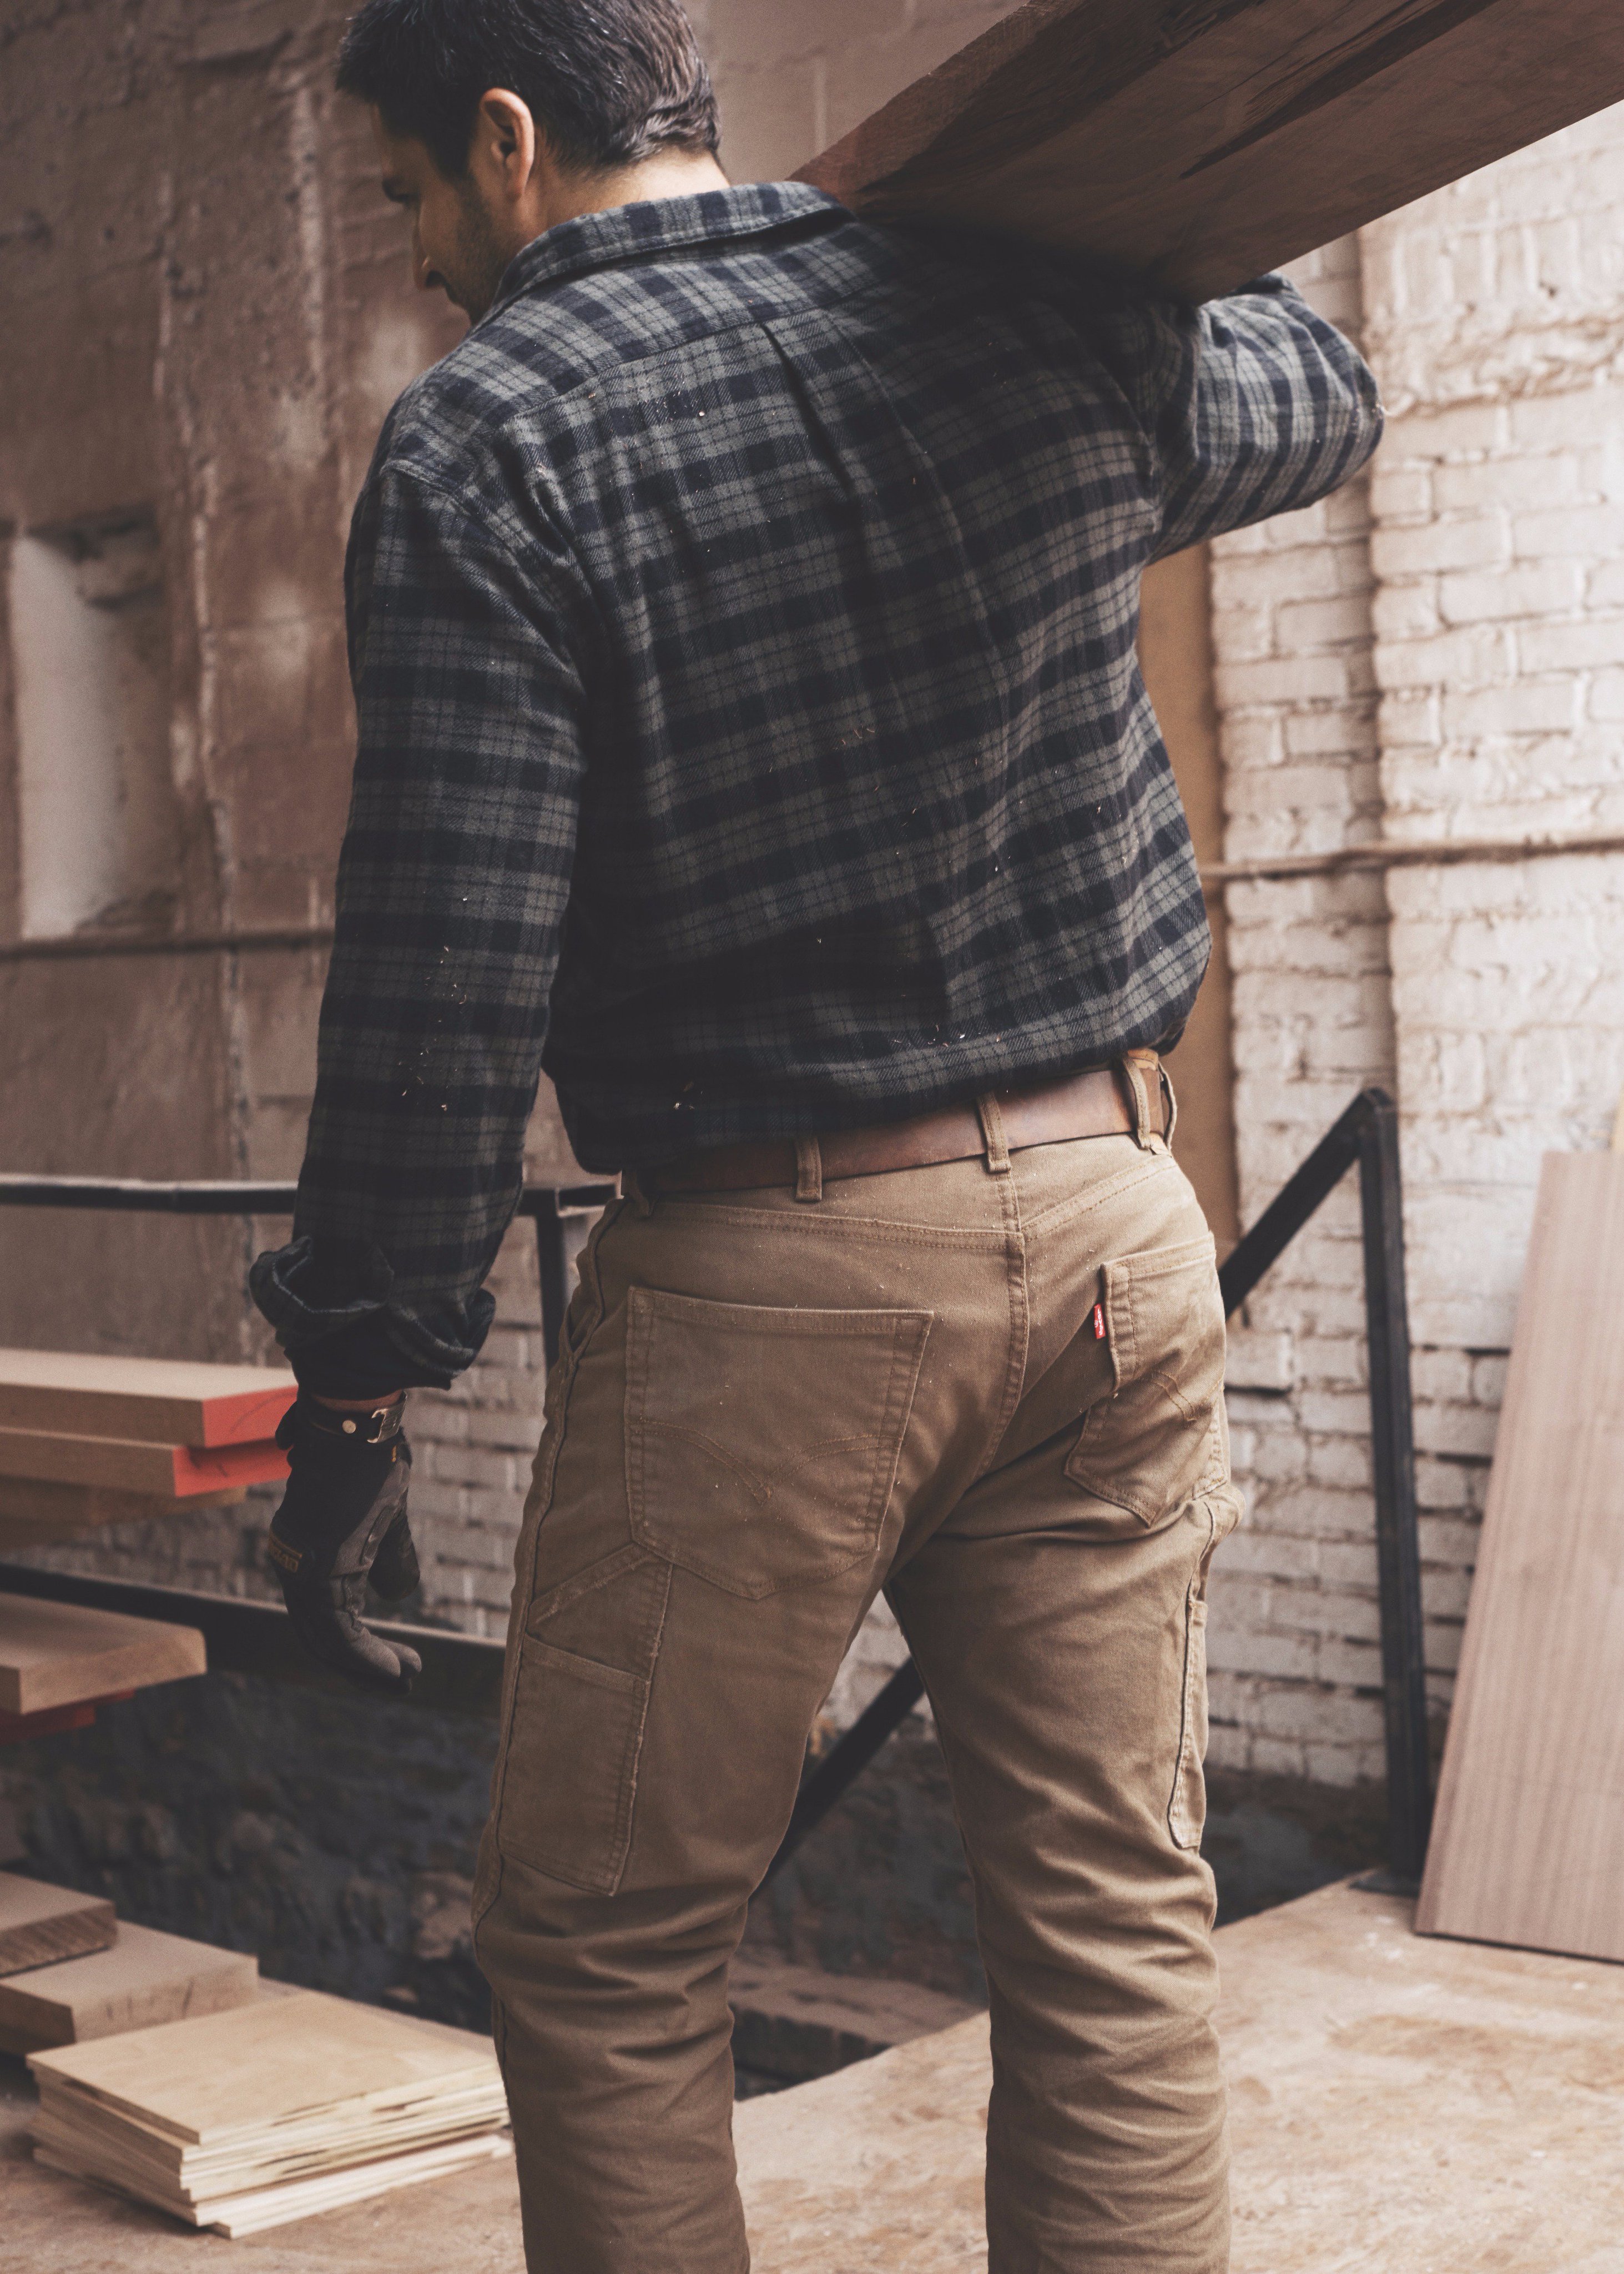 Levi's® on Twitter: "Designed for the modern tradesman. Made for everyday Introducing #Levis Workwear. &gt; https://t.co/yz0ORhUO9S https://t.co/Jz315NVtTu" /